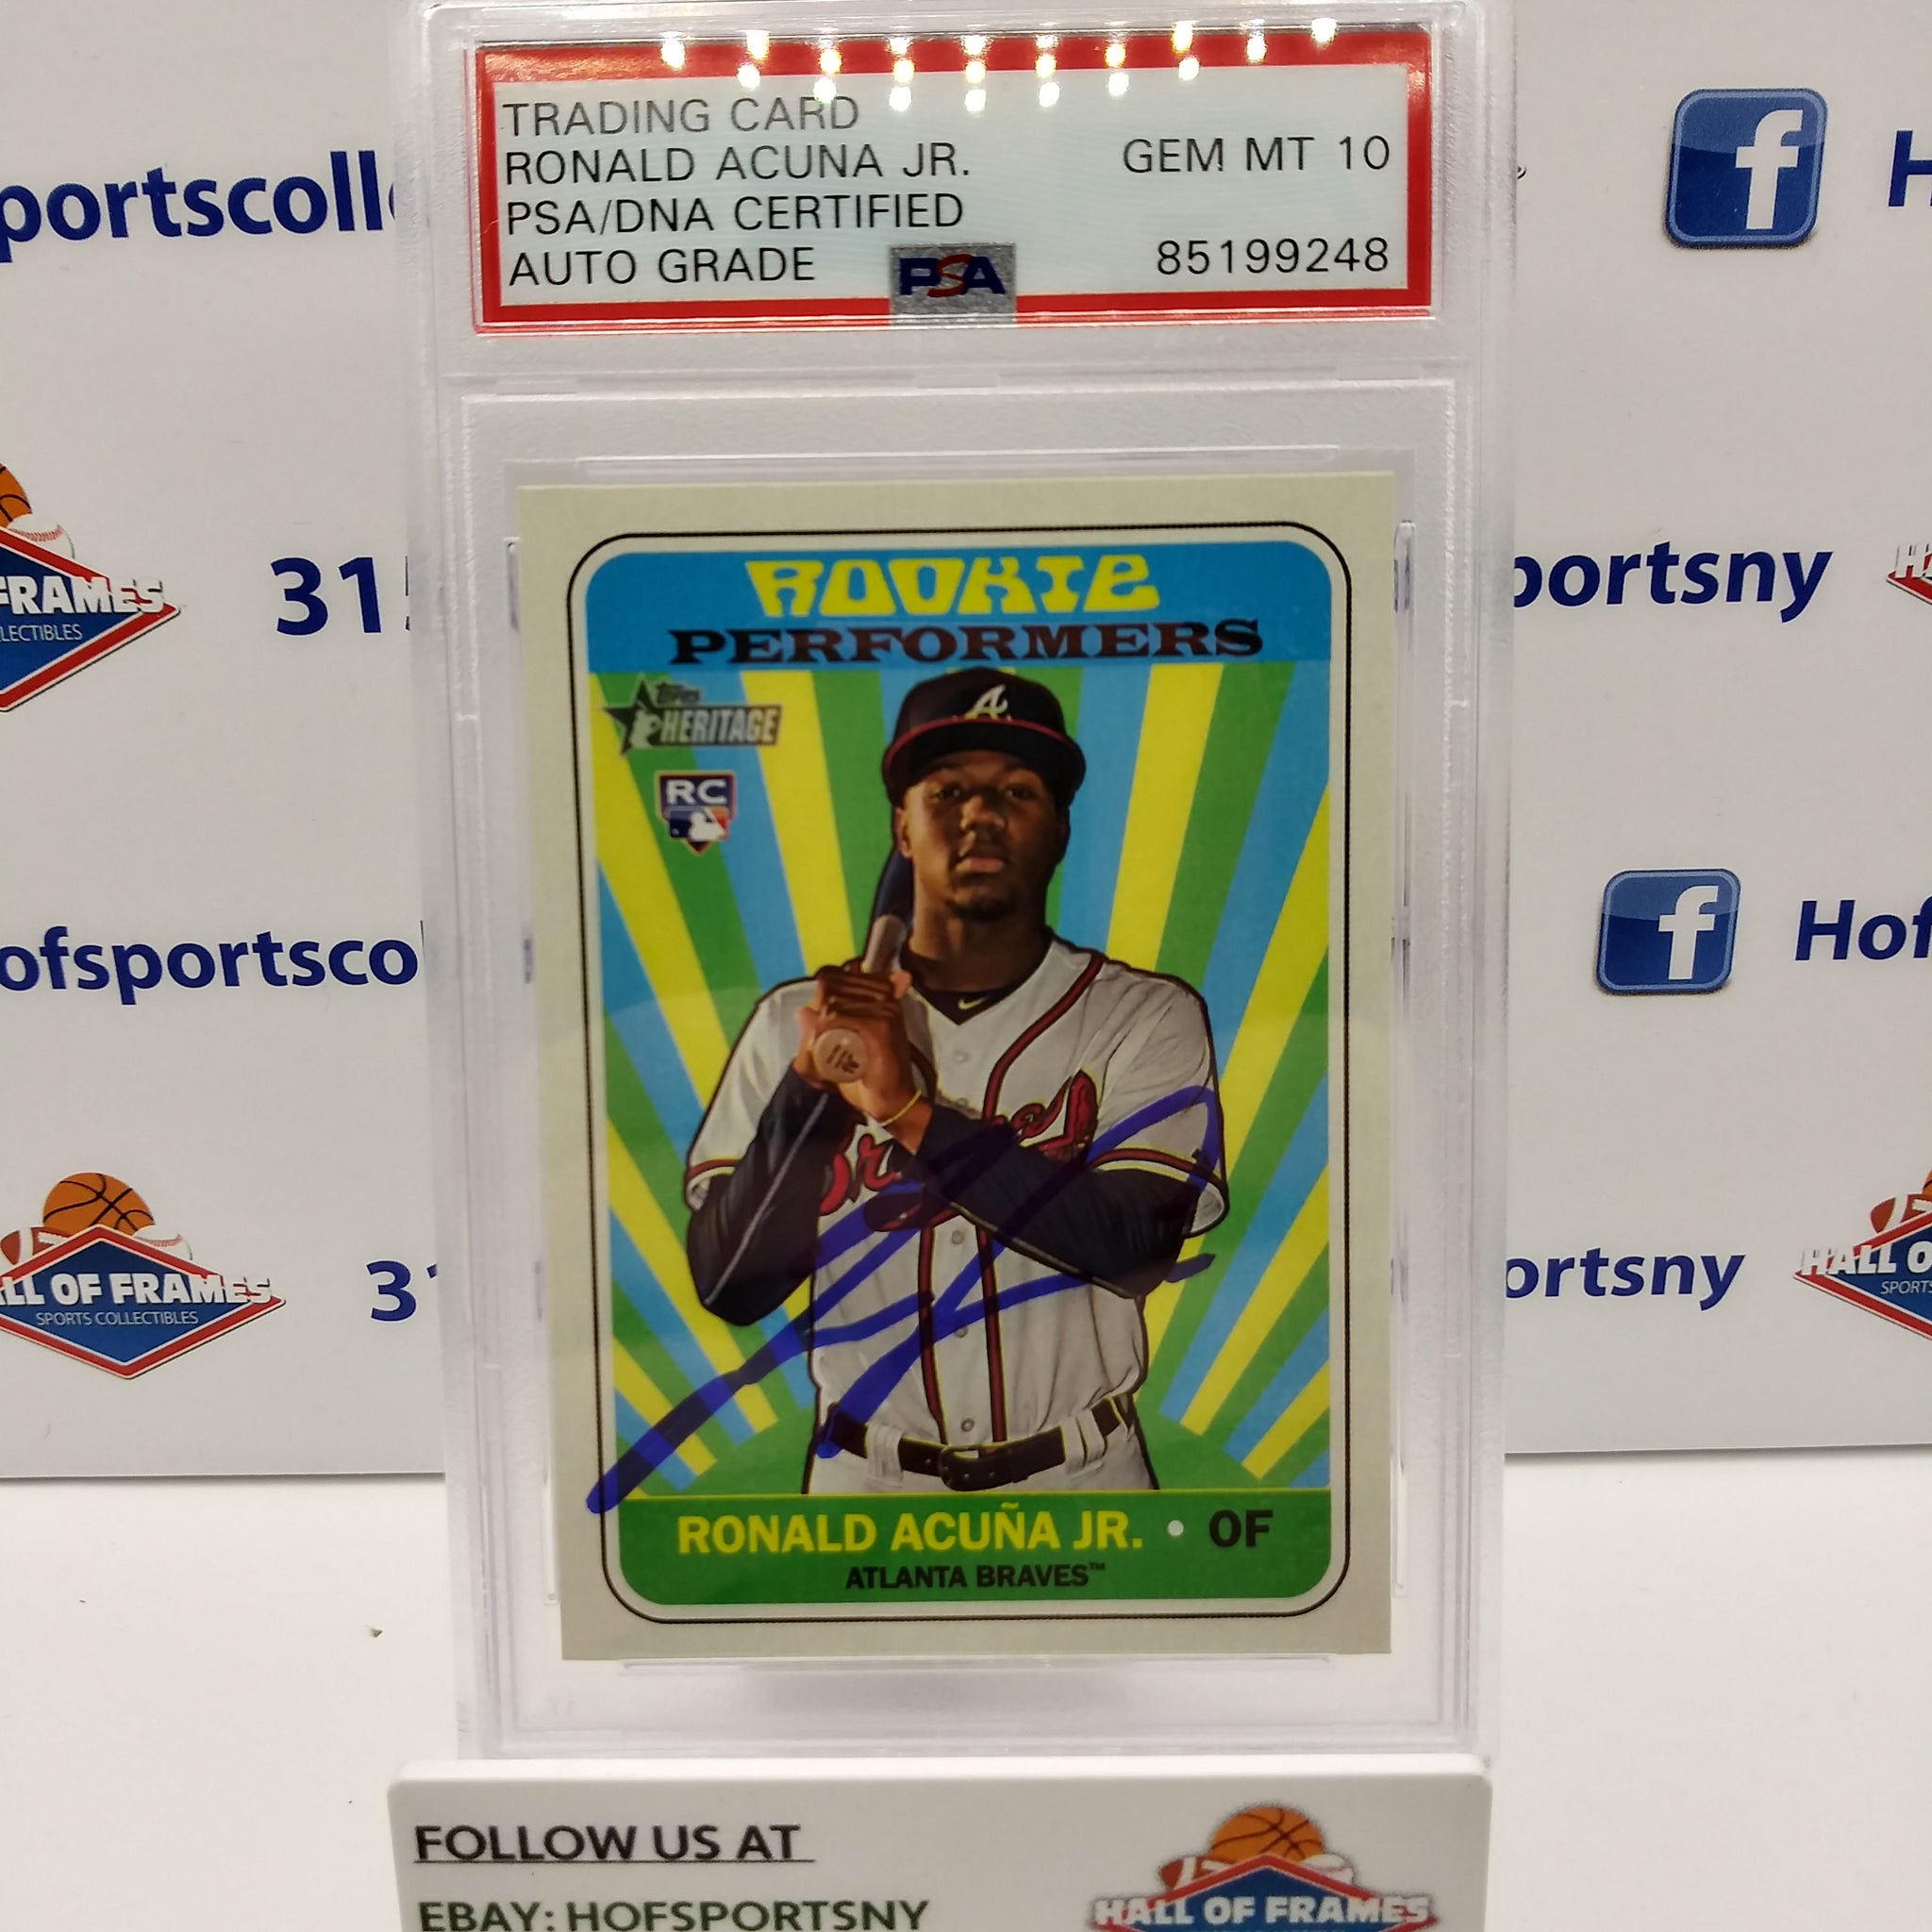 2018 TOPPS HERITAGE RONALD ACUNA JR. ROOKIE PERFORMERS PSA AUTHENTIC GEM MT 10!